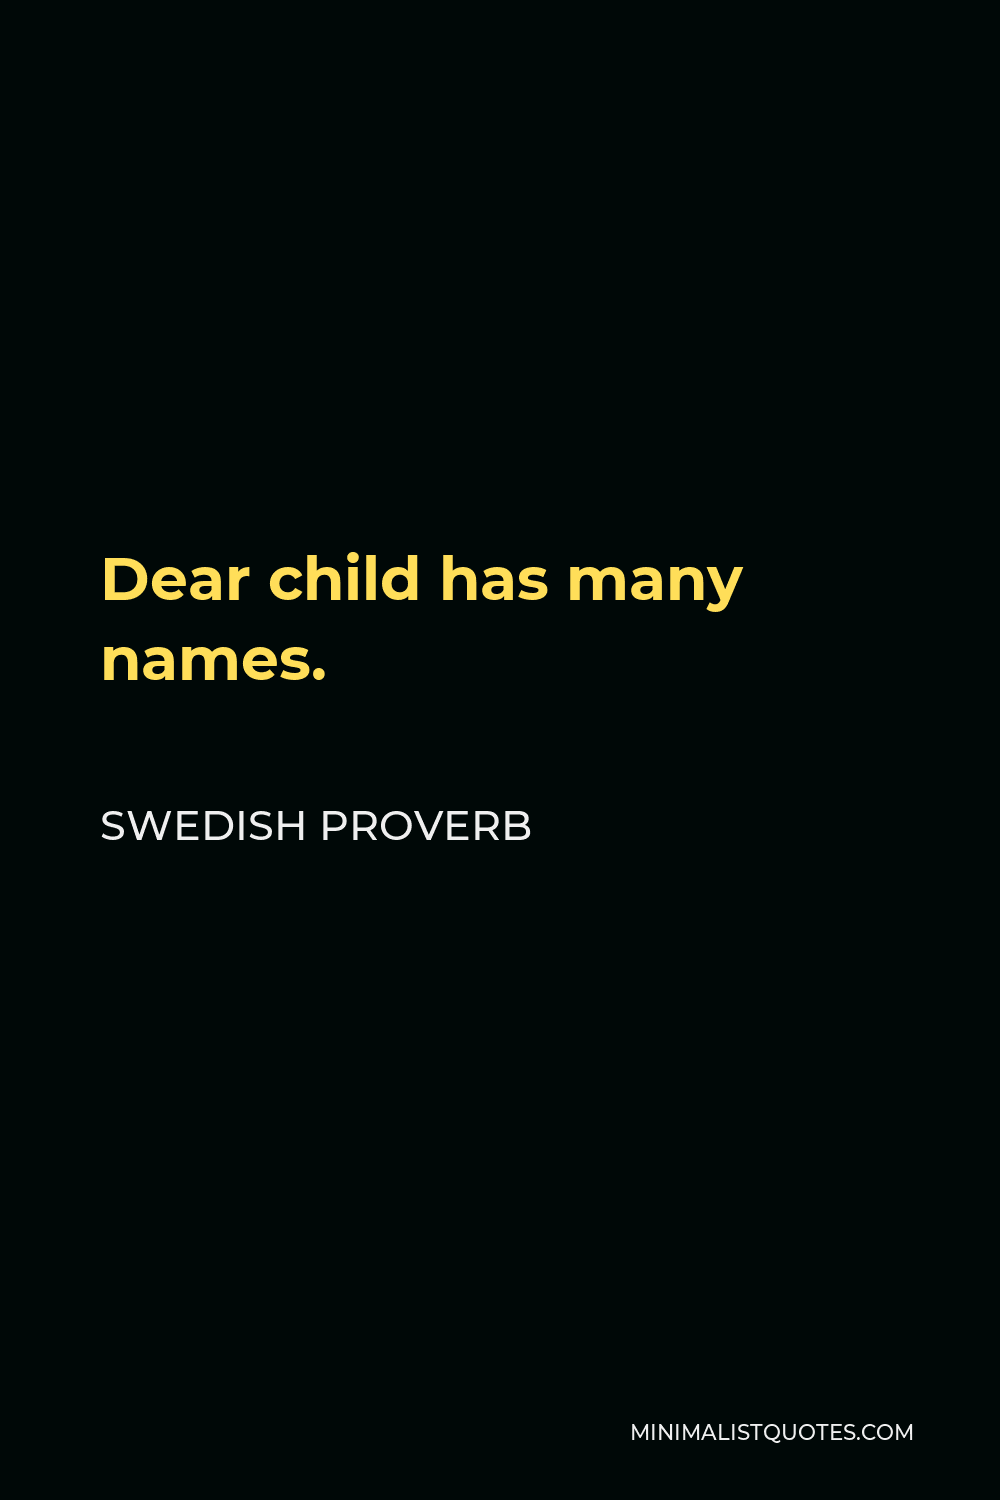 Swedish Proverb Quote - Dear child has many names.